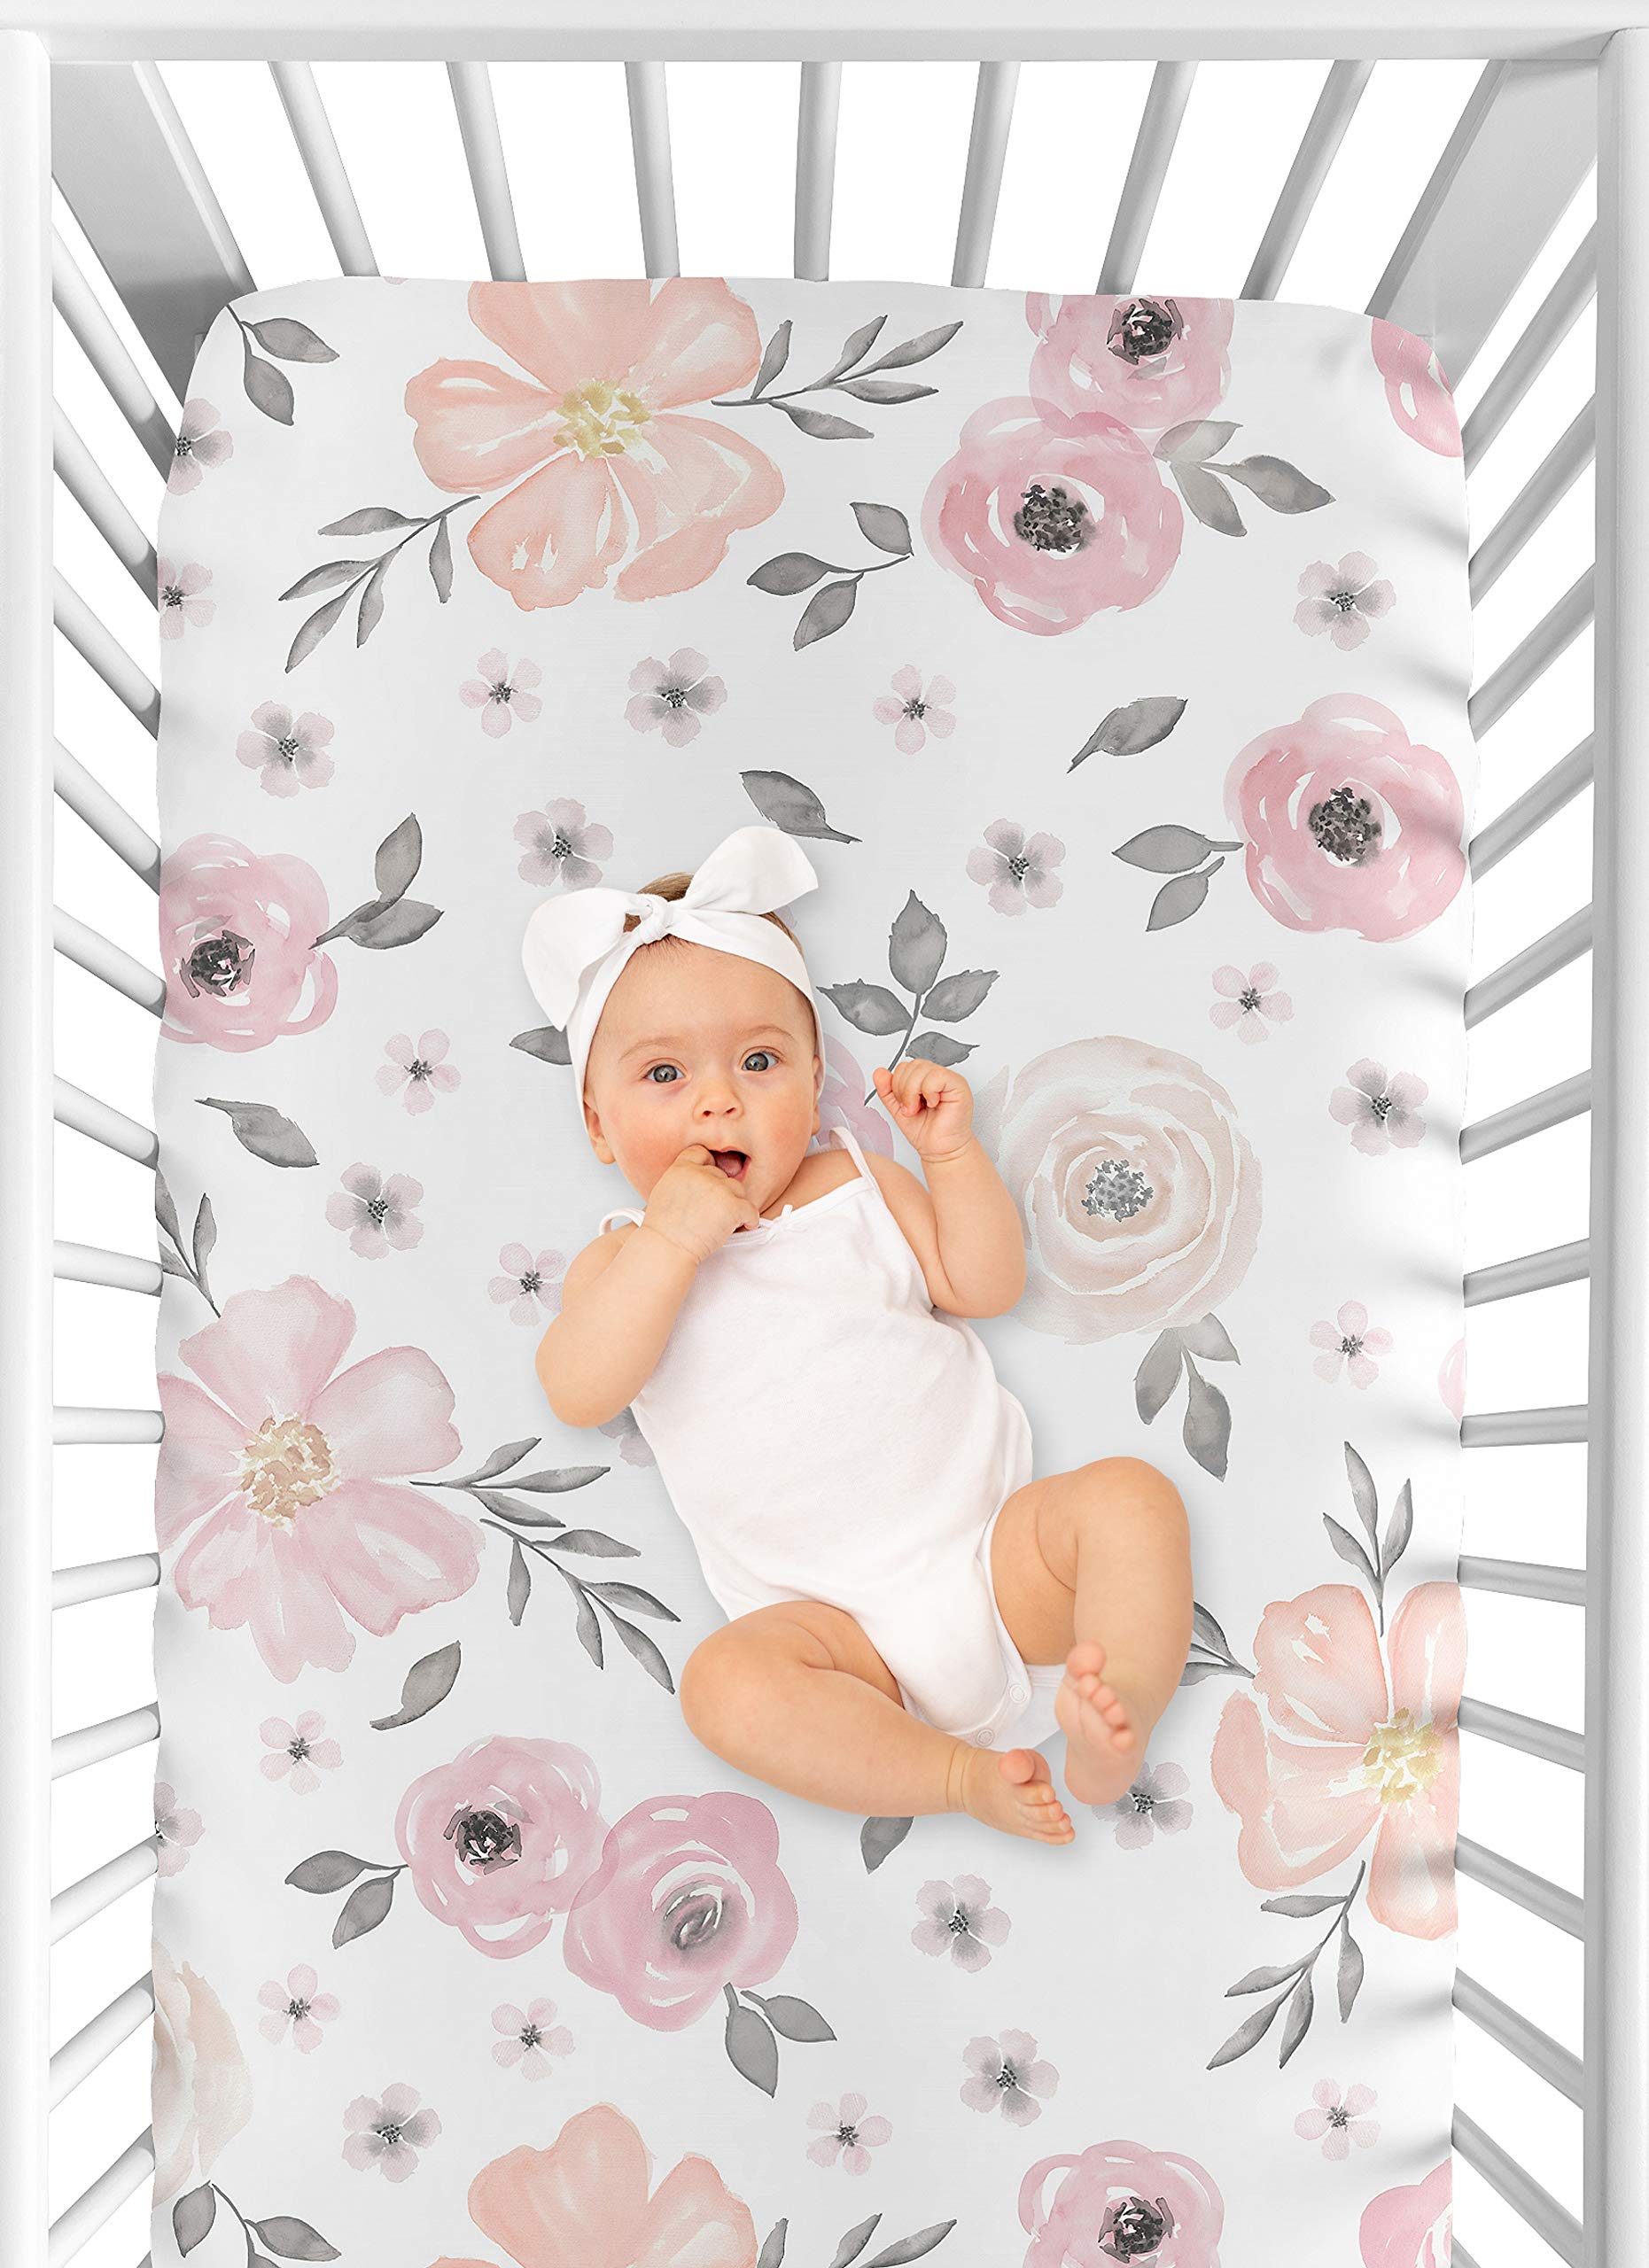 Sweet Jojo Designs Watercolor Floral Girl Cotton Fitted Crib Sheet Baby or Toddler Bed Nursery - Blush Pink, Grey and White Boho Shabby Chic Rose Flower 100% Cotton